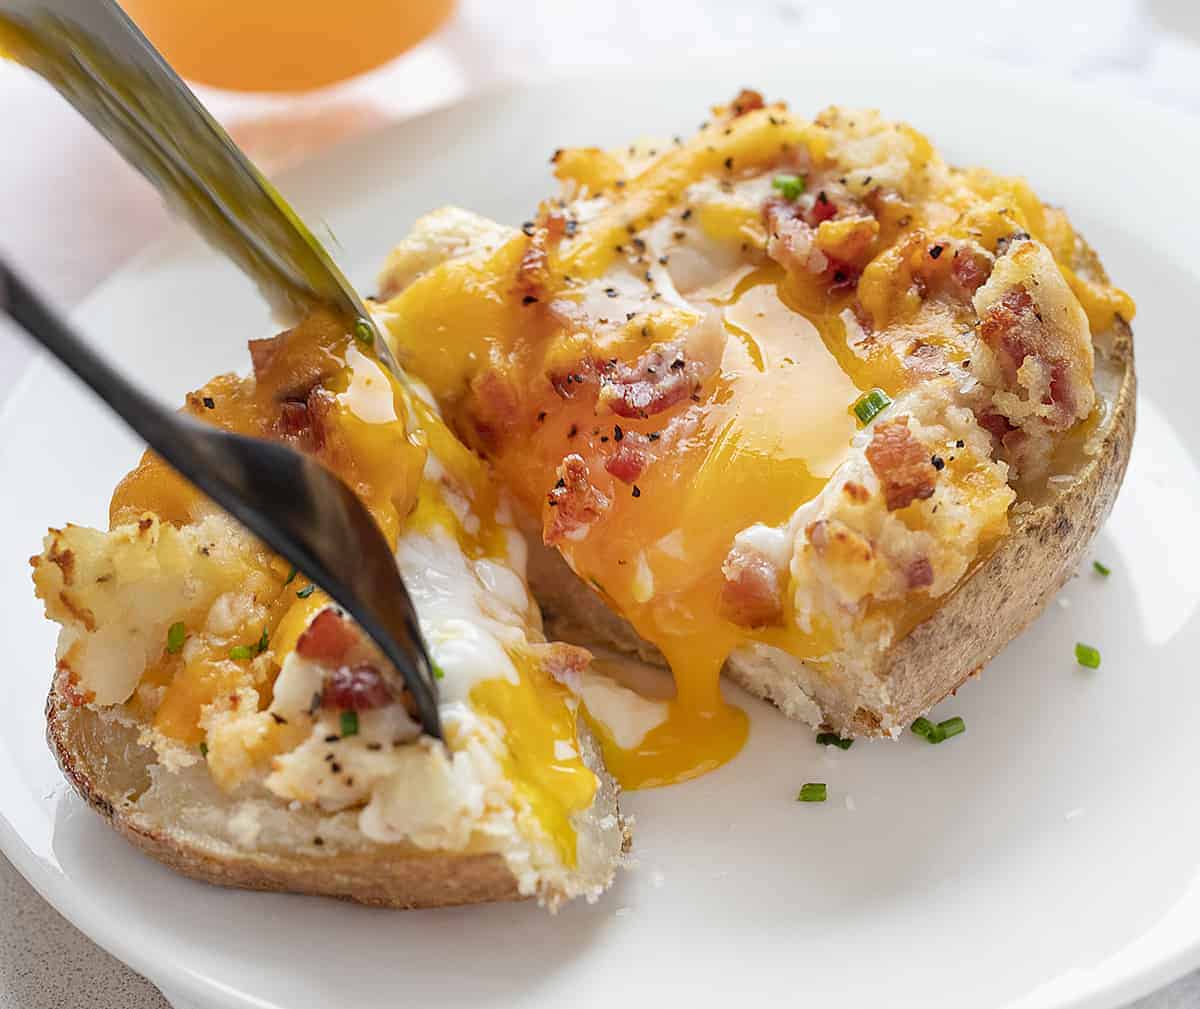 Fork and Knife Cutting into Breakfast Twice Baked Potato